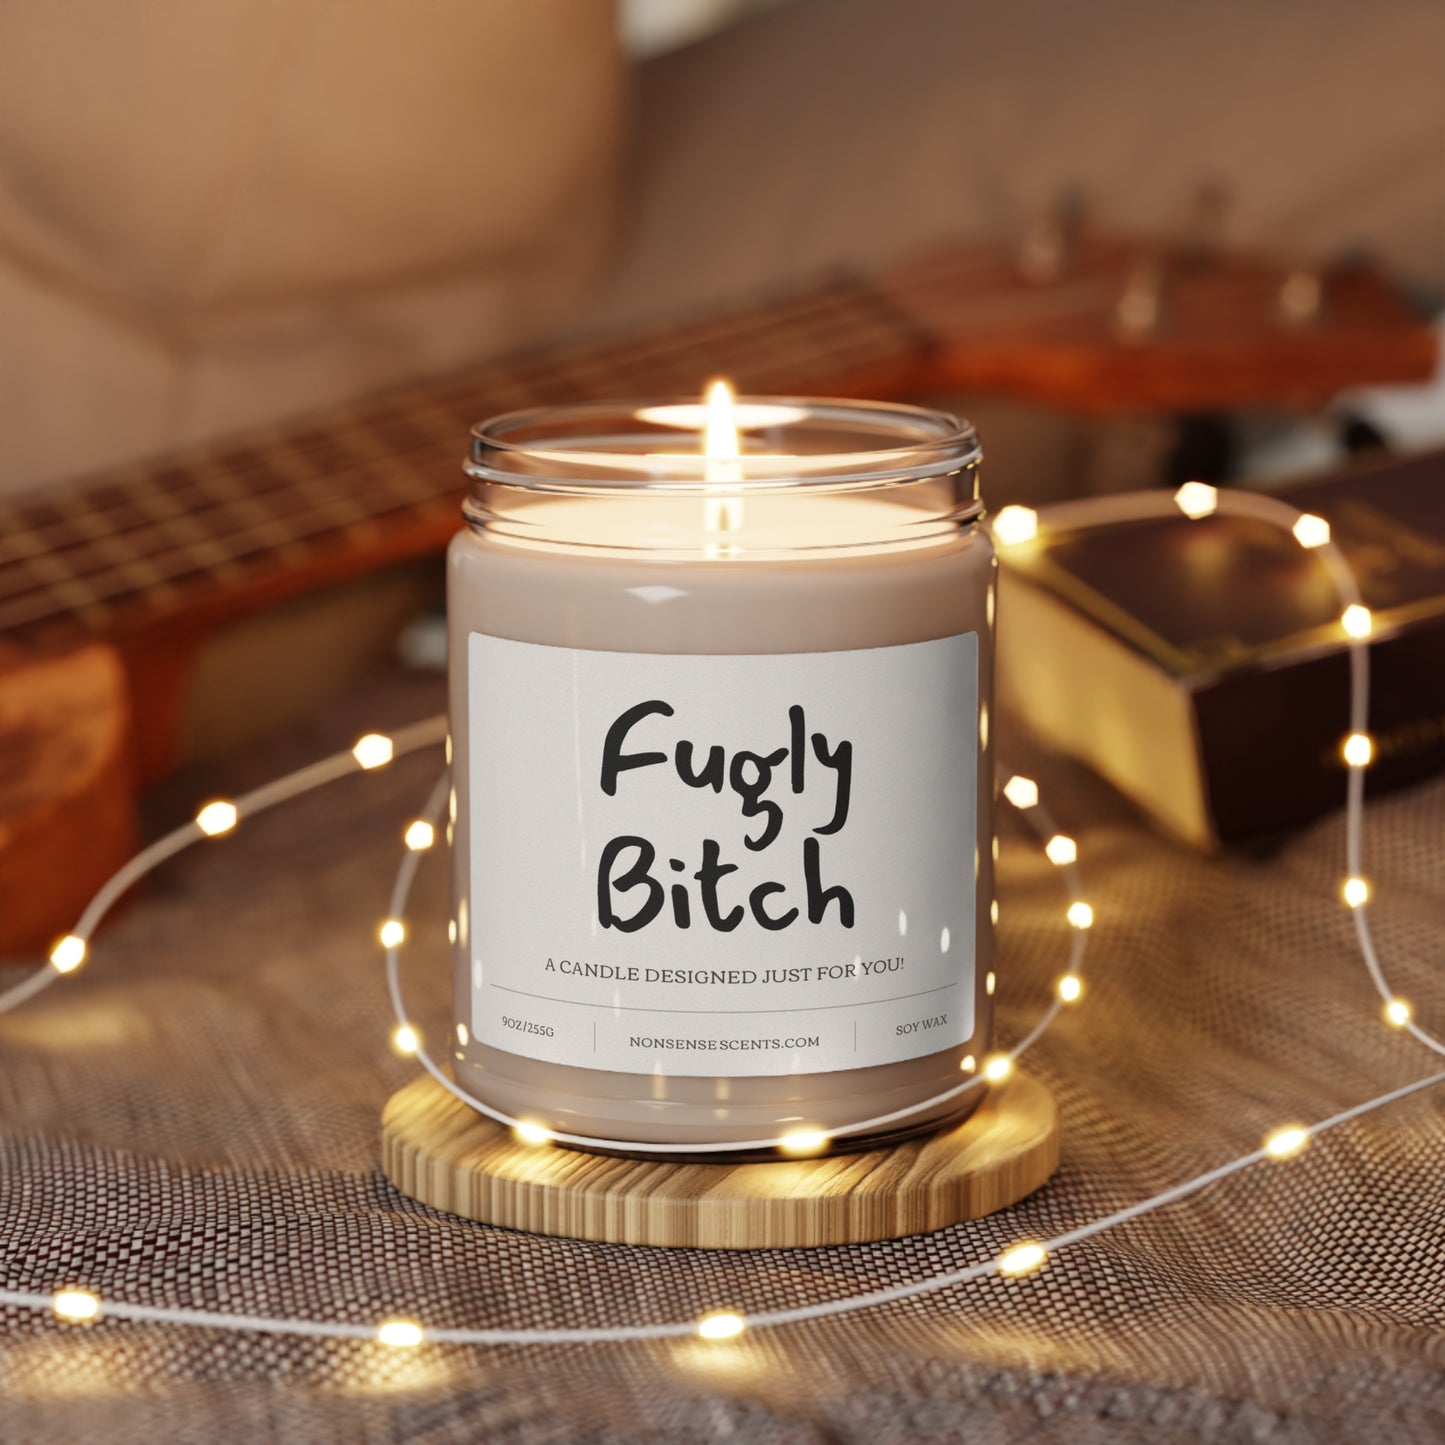 "Fugly Bitch" Scented Candle